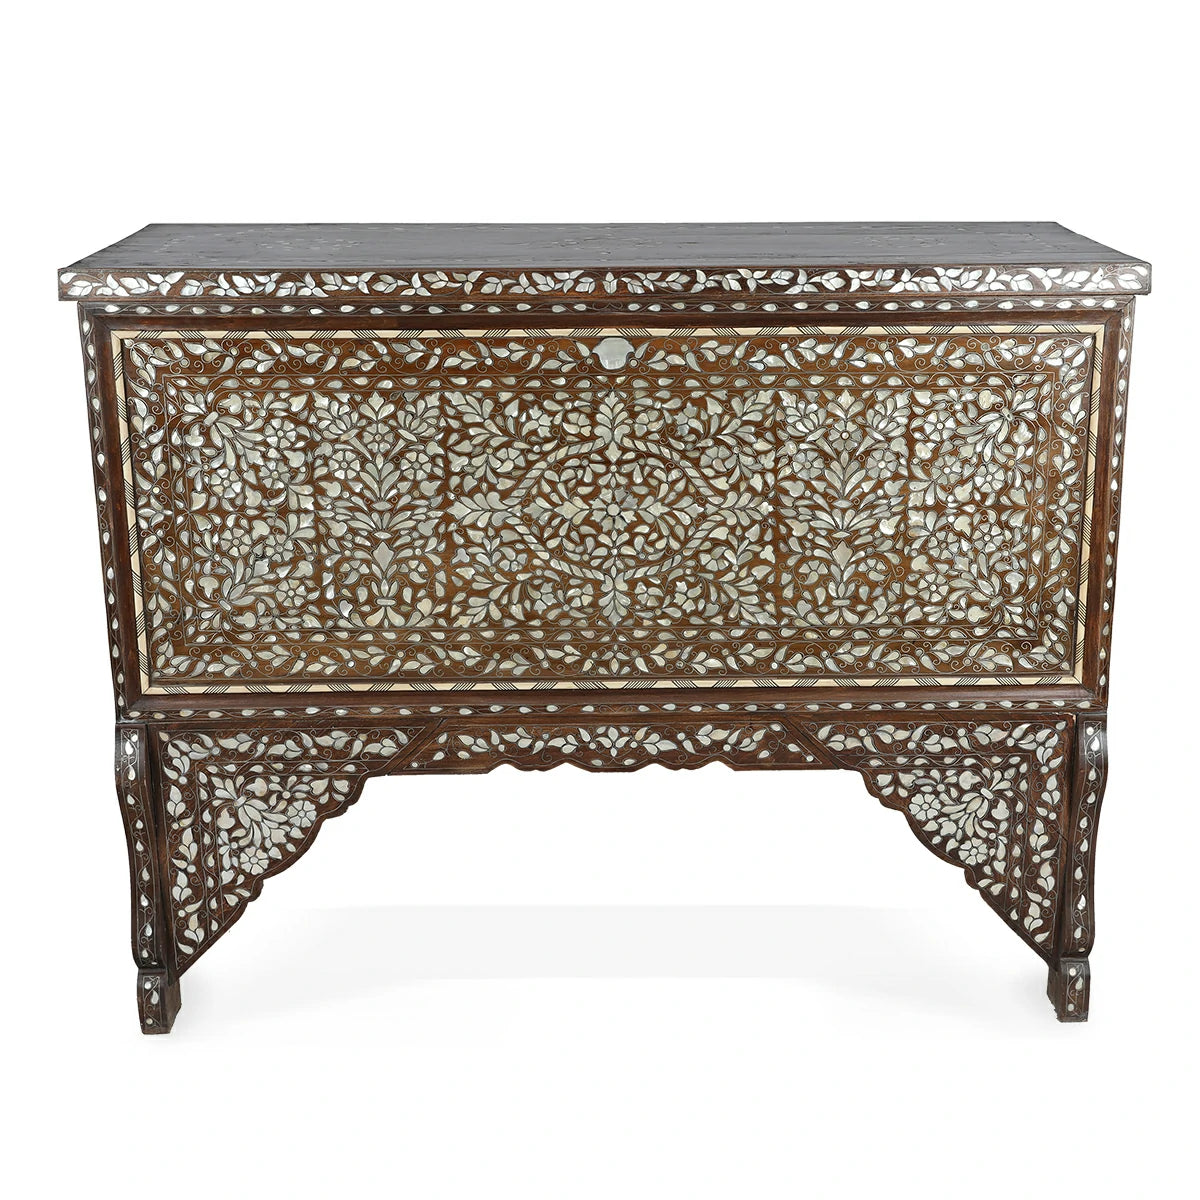 Font View of Vintage Wood & Mother of Pearl Patterned Console